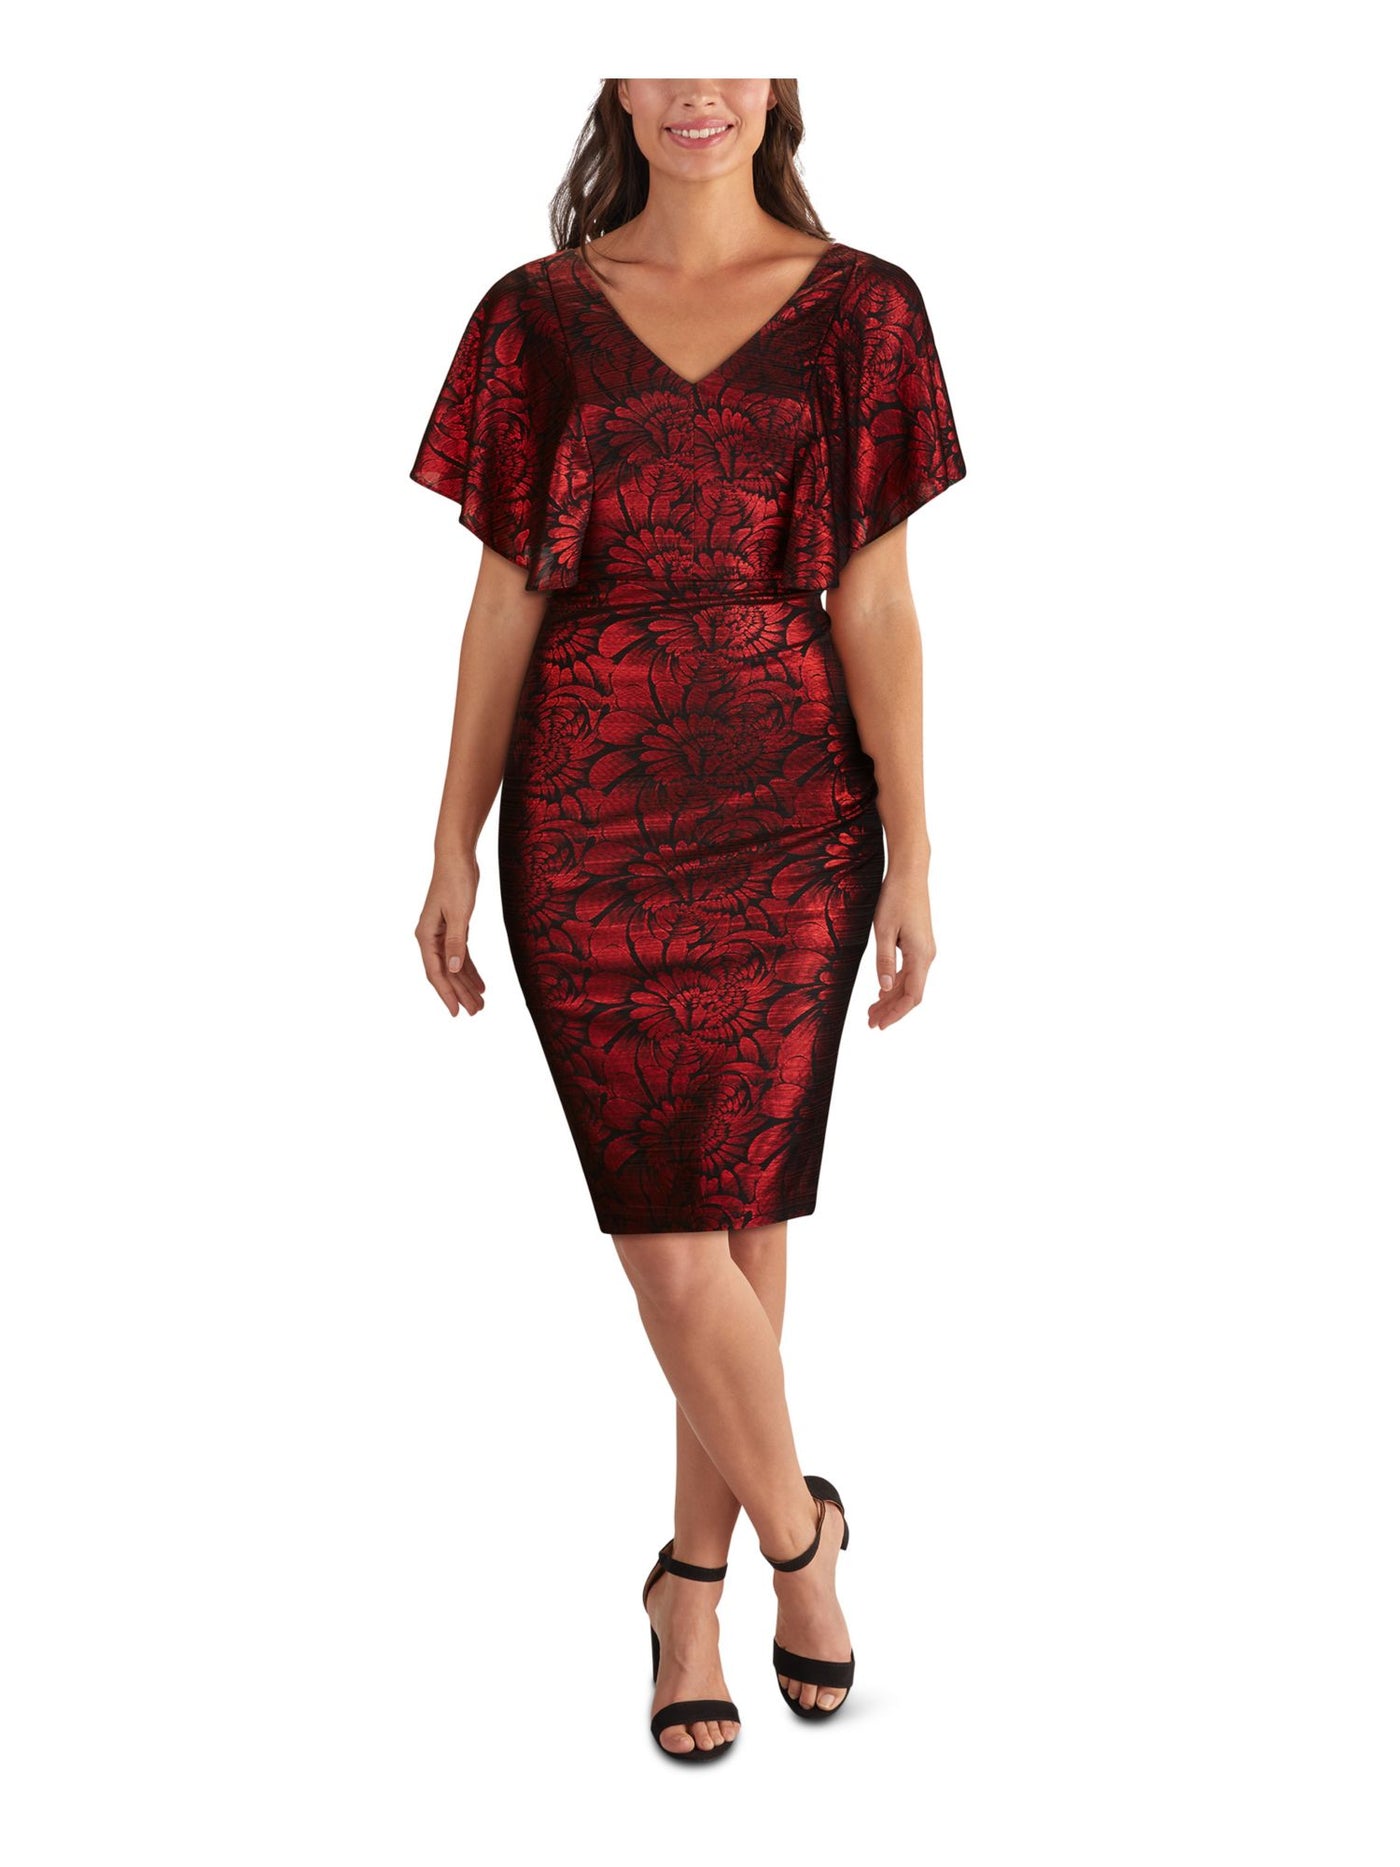 KENSIE Womens Red Cape Sleeve Floral V Neck Above The Knee Evening Sheath Dress 0